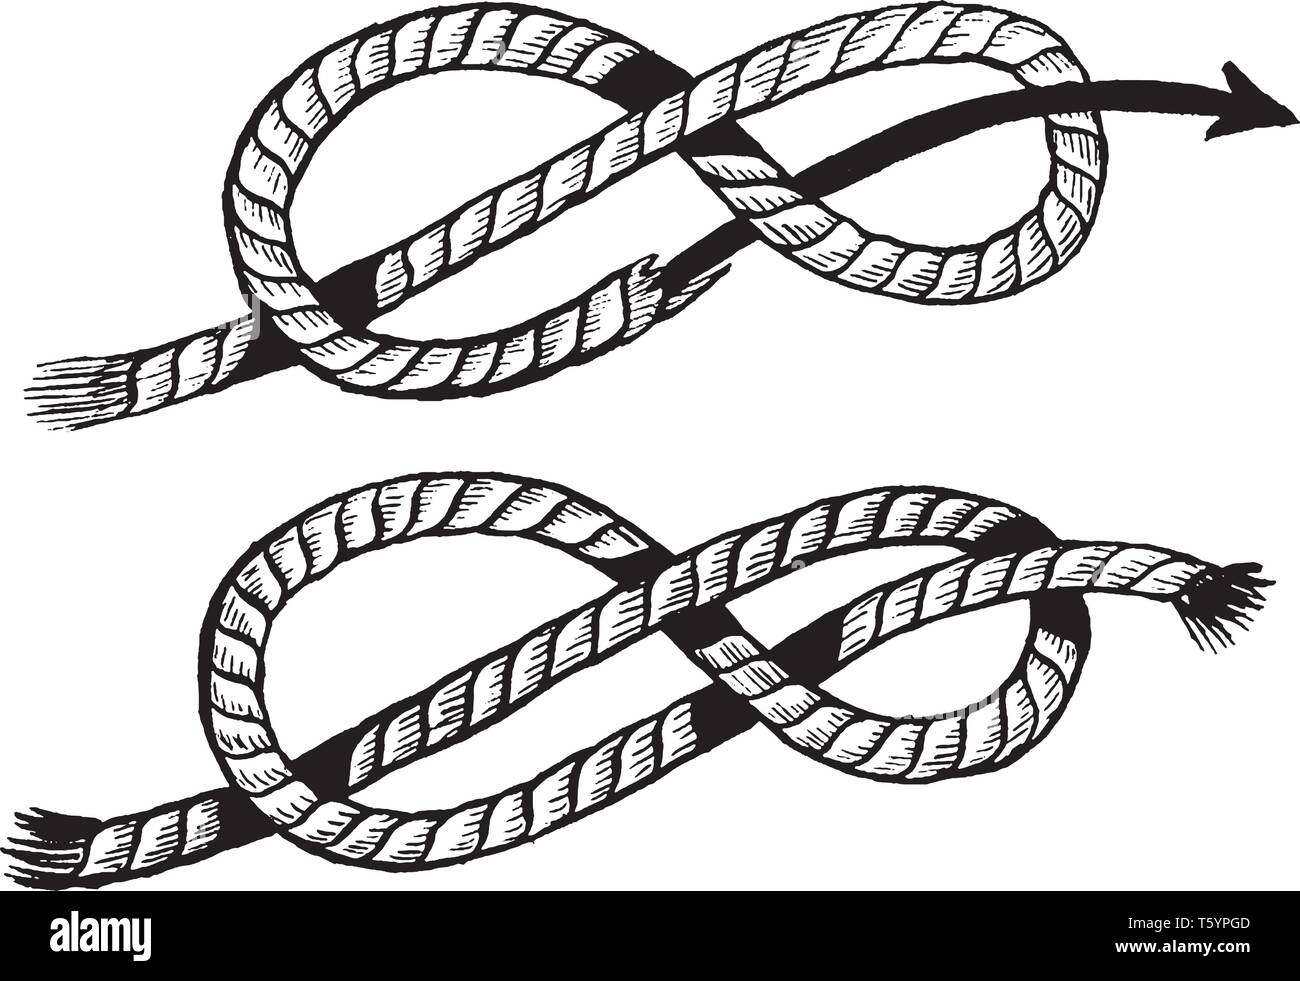 Figure Eight Knot is a type of stopper knot and it is very important in both sailing and rock climbing as a method of stopping ropes, vintage line dra Stock Vector